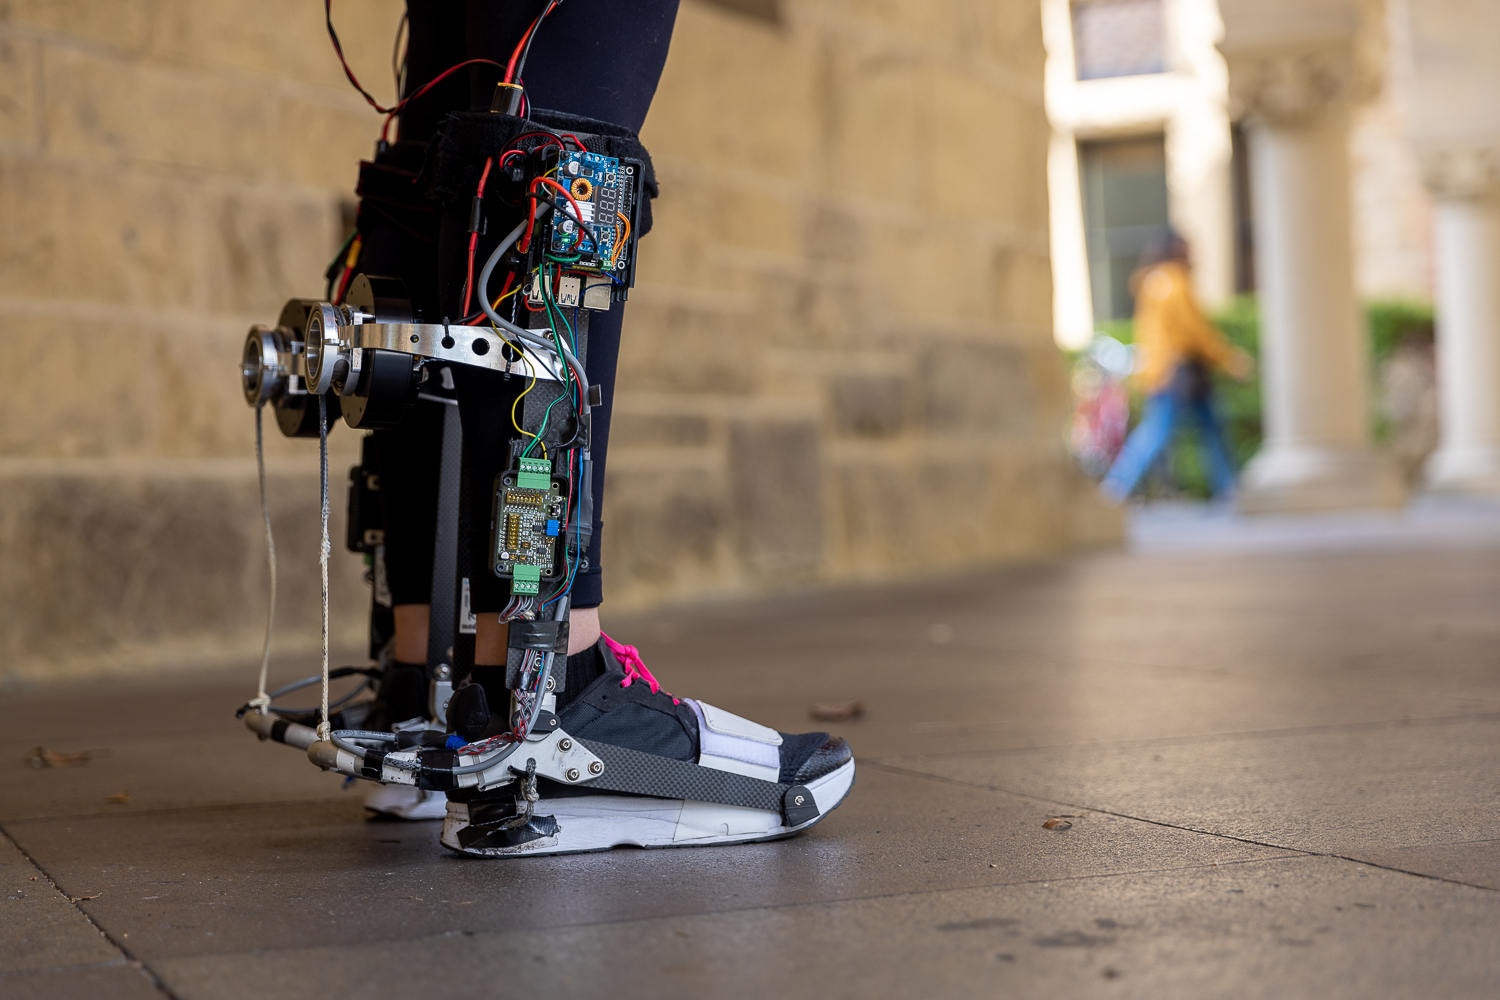 A closeup view of the portable ankle exoskeleton